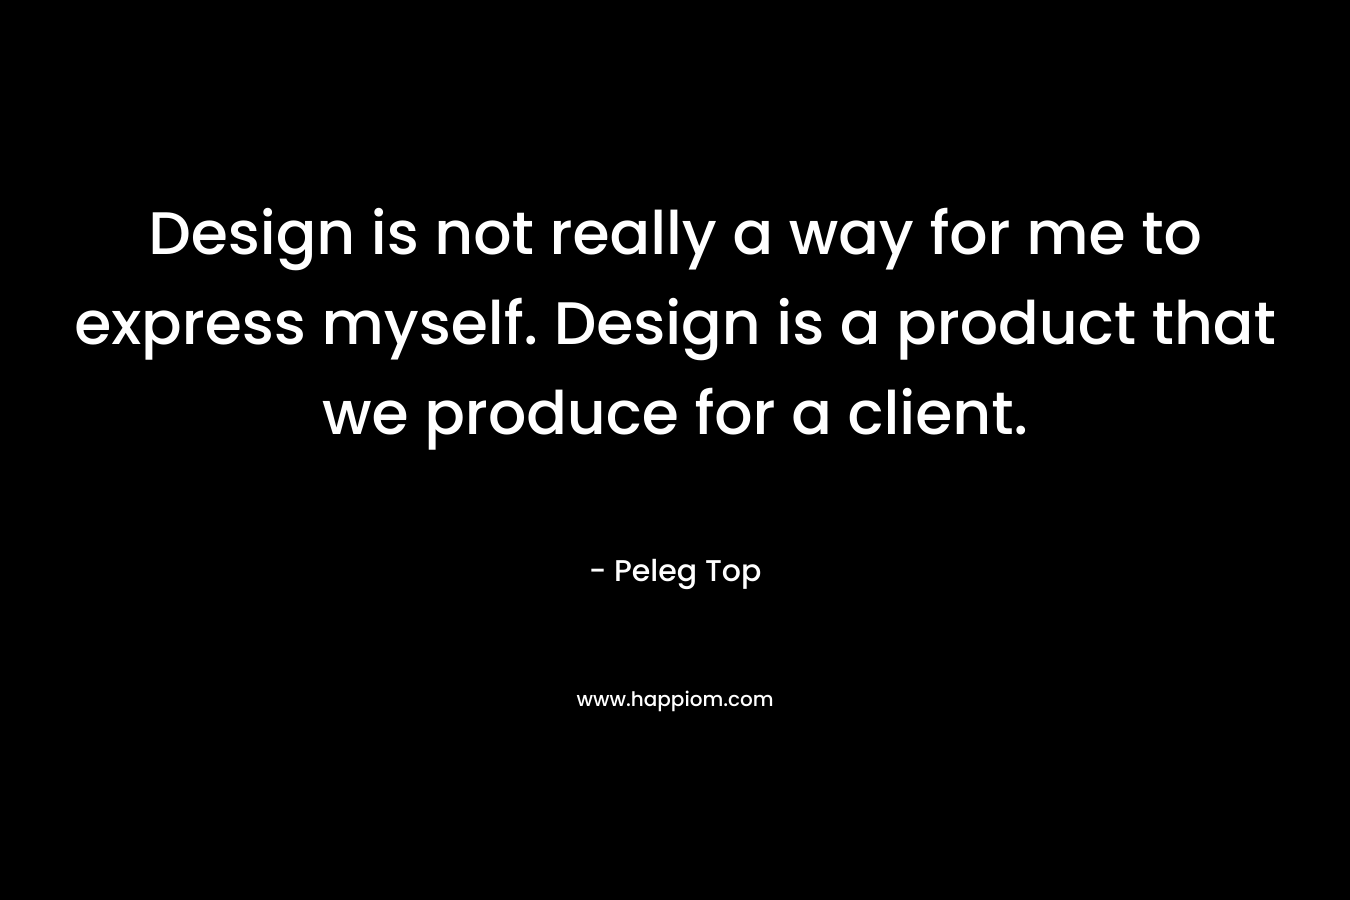 Design is not really a way for me to express myself. Design is a product that we produce for a client.